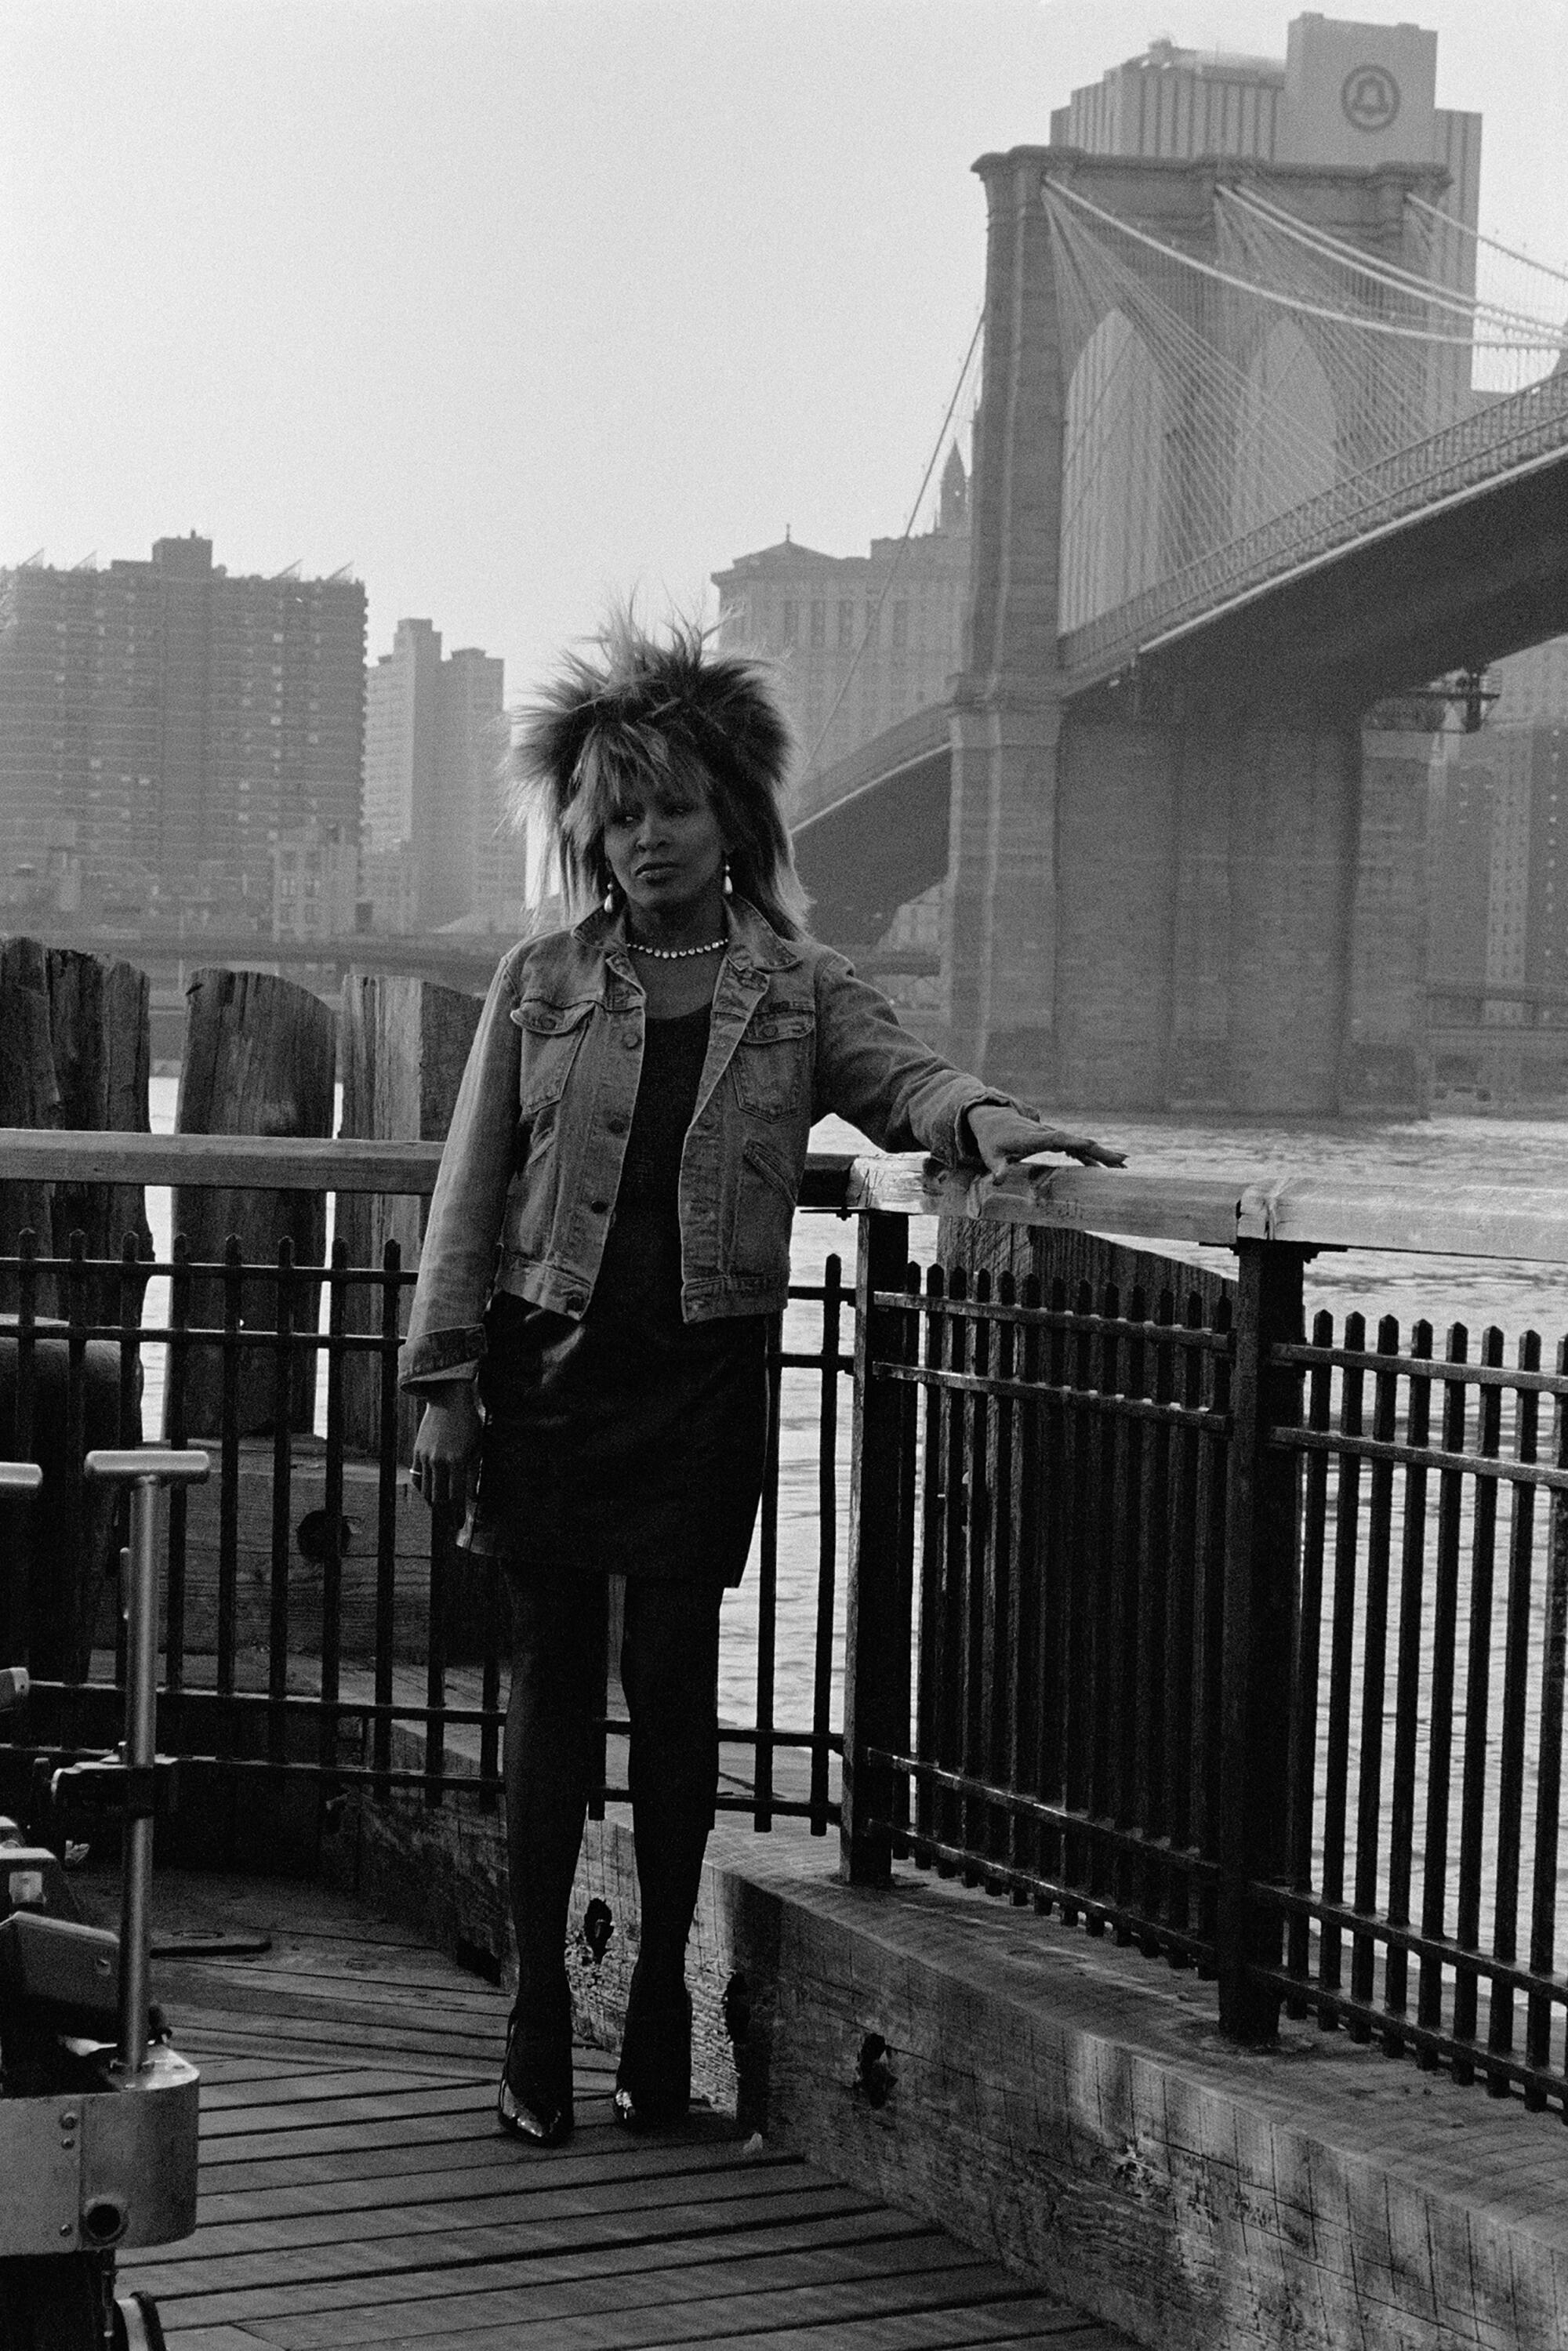 Tina Turner, "What's Love Got to Do with It?," New York, 1984